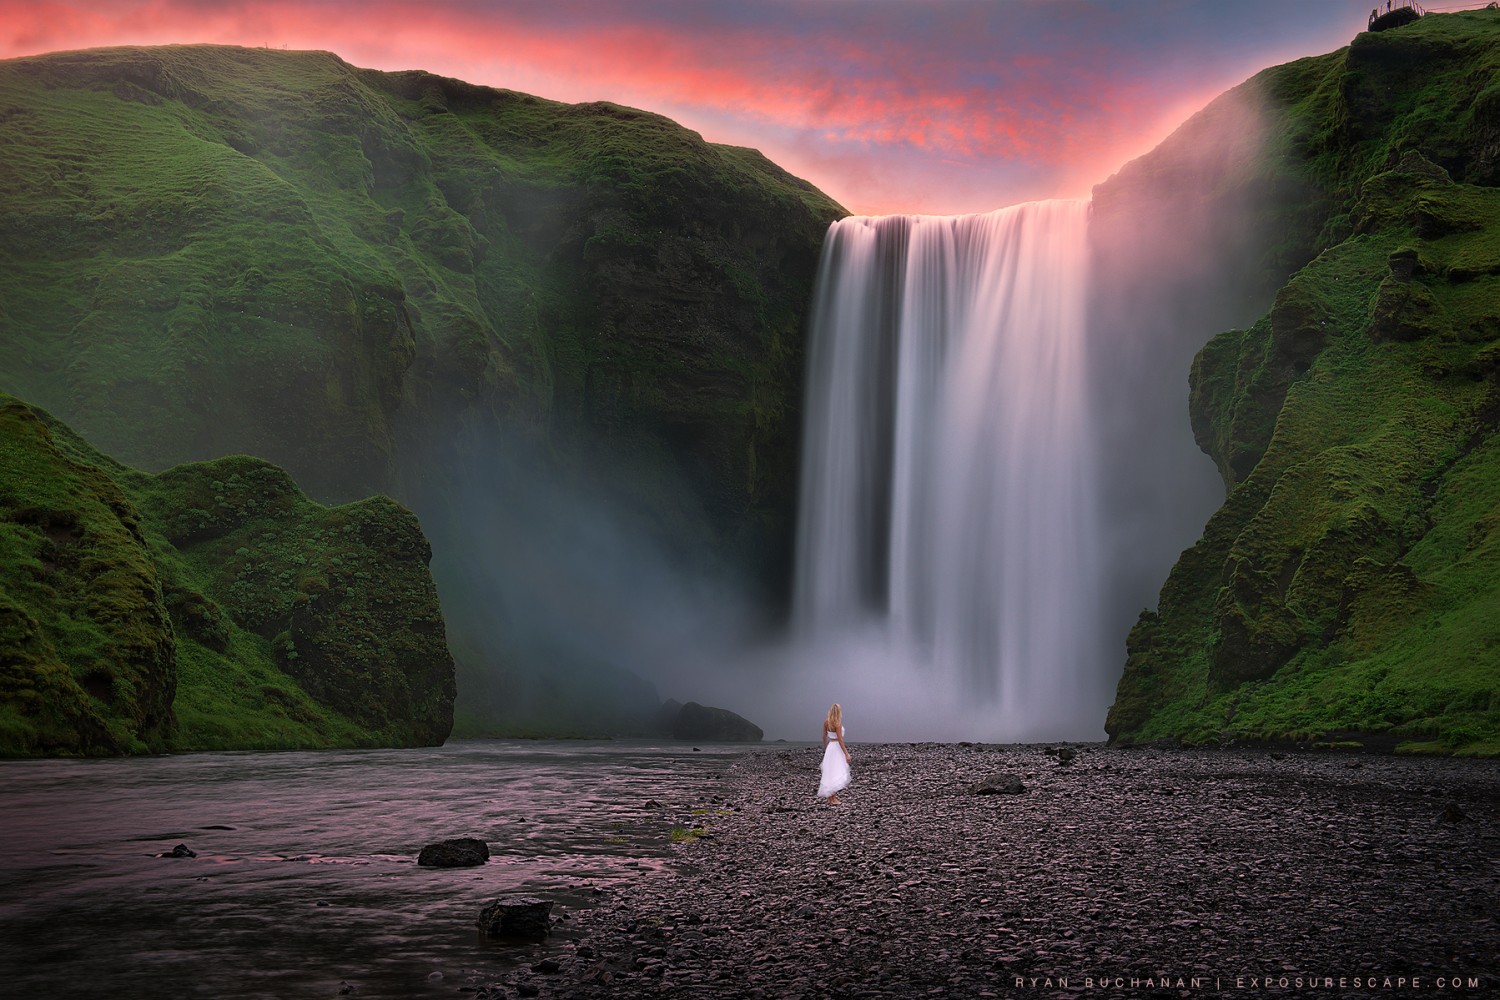 How A Dreamy Photo Shoot At Skogafoss Led To A Romantic Wedding Proposal